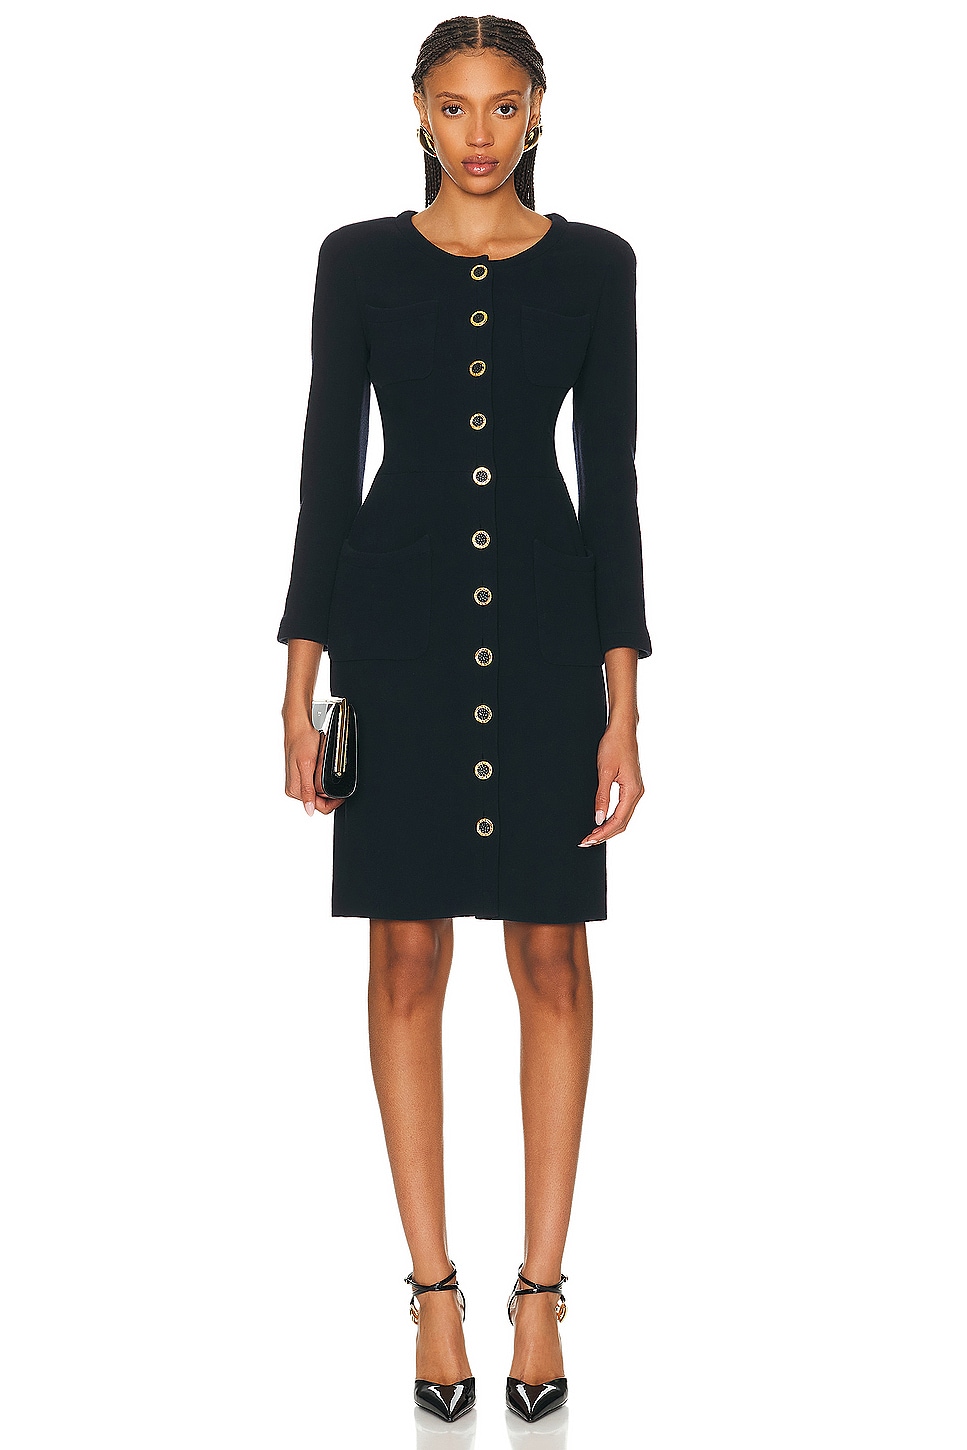 Image 1 of FWRD Renew Chanel Tweed Button Dress in Black